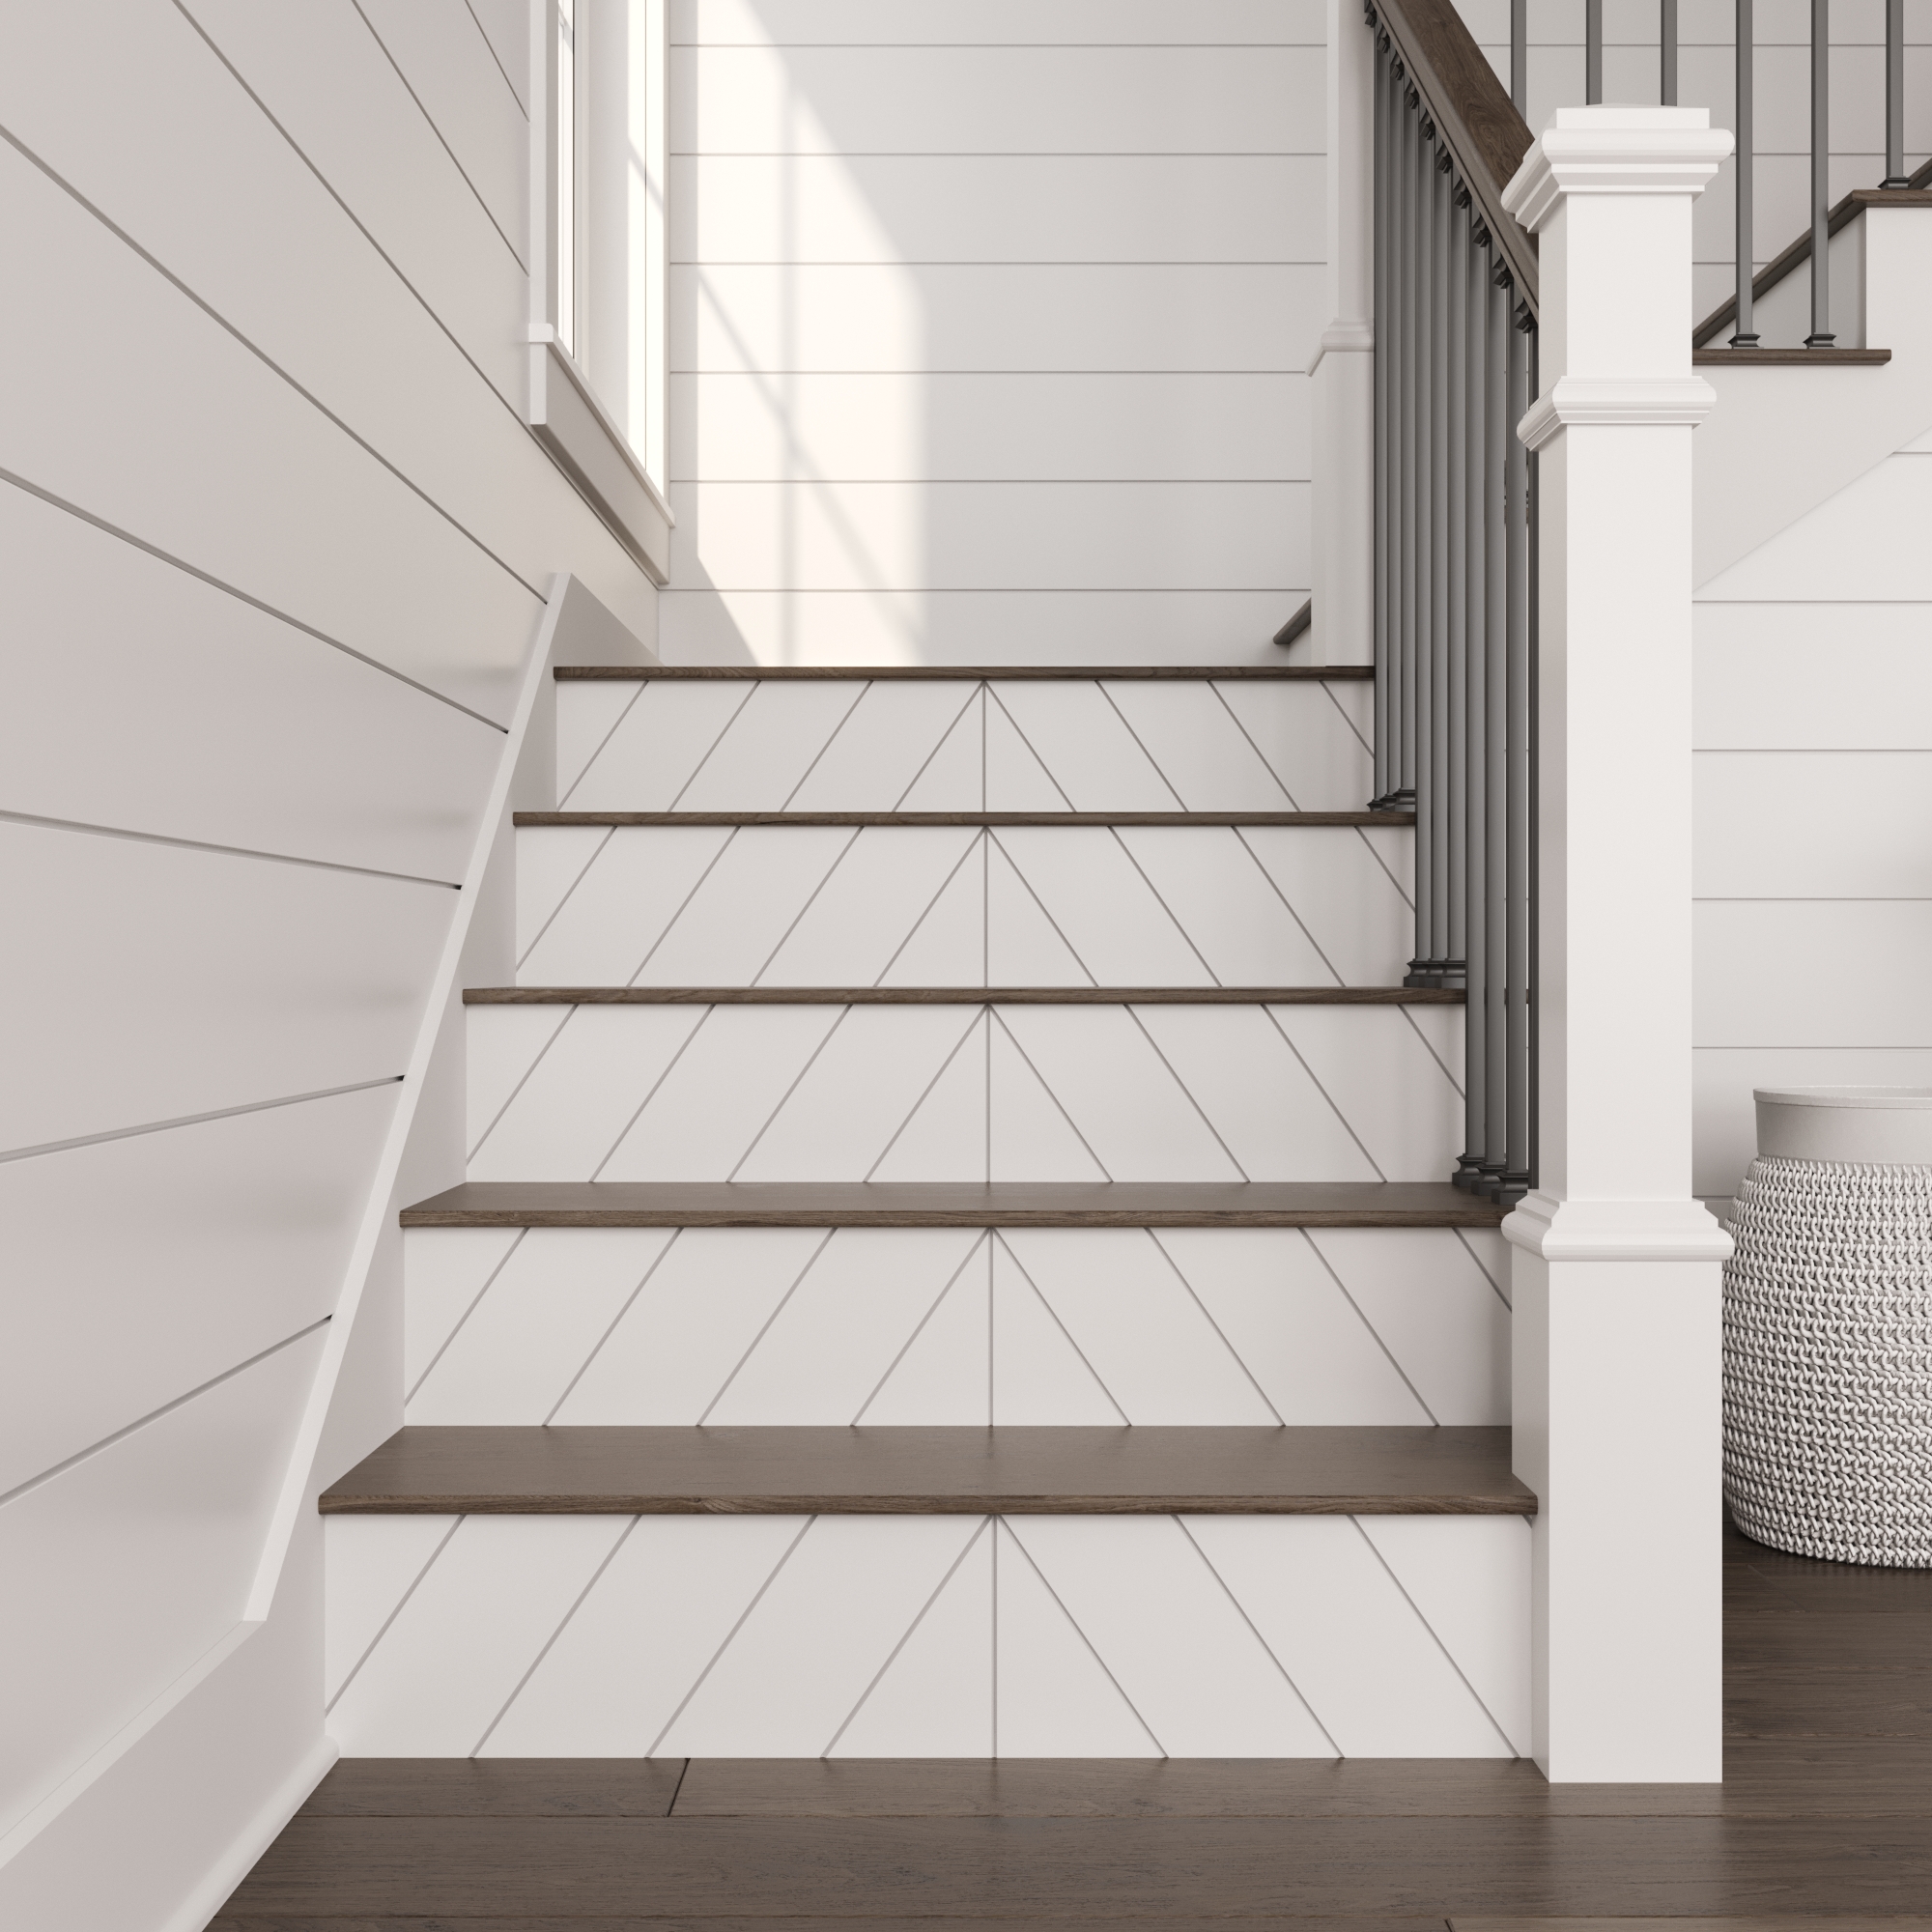 Reversible Stair Risers, Tile Stair Treads And Risers